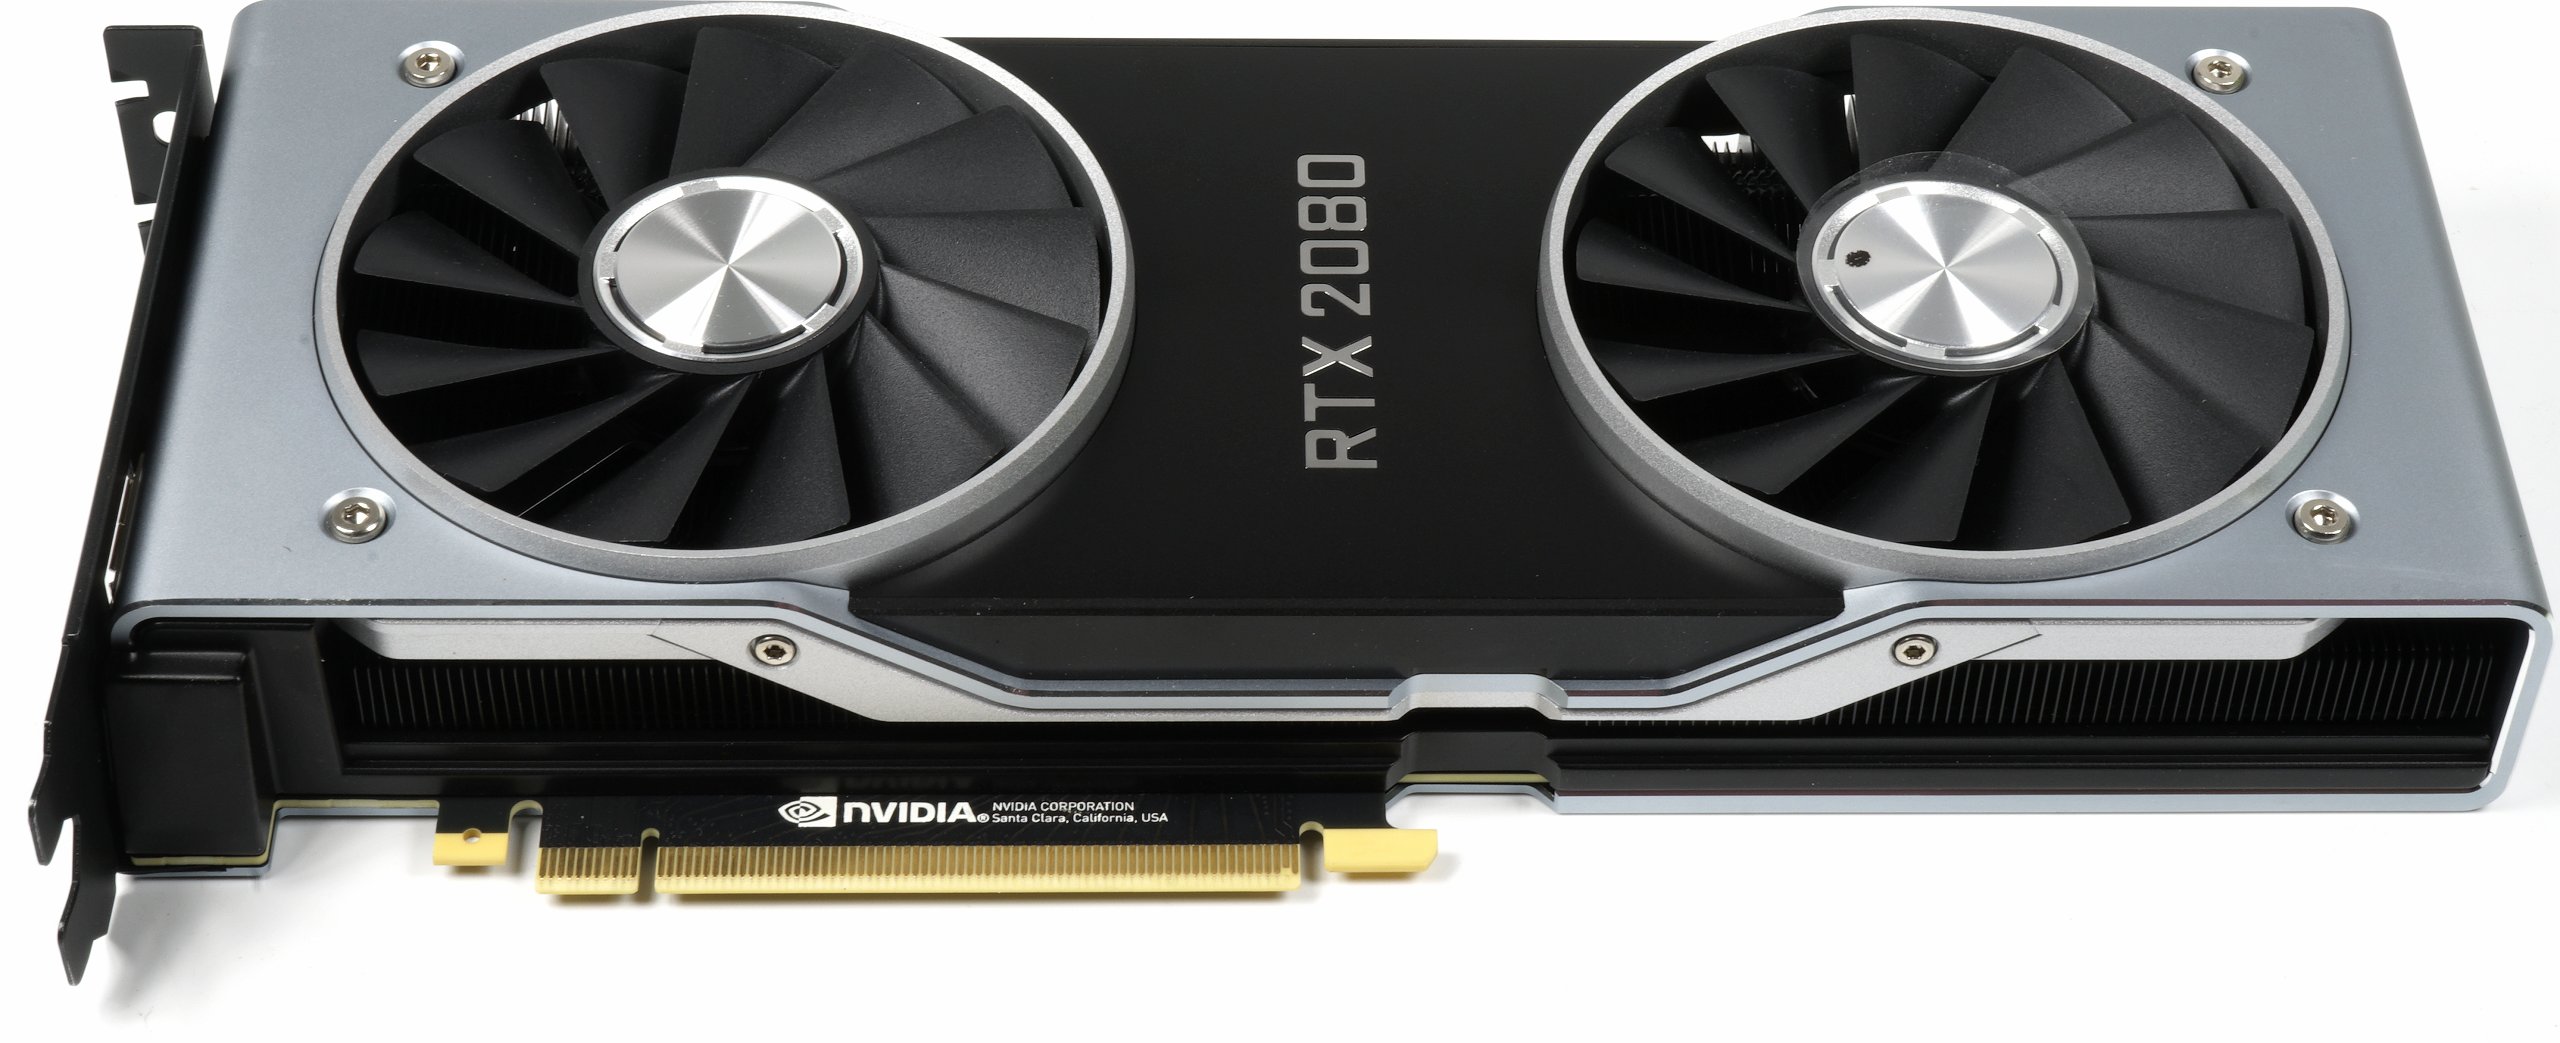 Nvidia GeForce RTX 2080 and RTX Ti in review - Gaming, Turing benchmarks and new insights | Page 3 | igor´sLAB